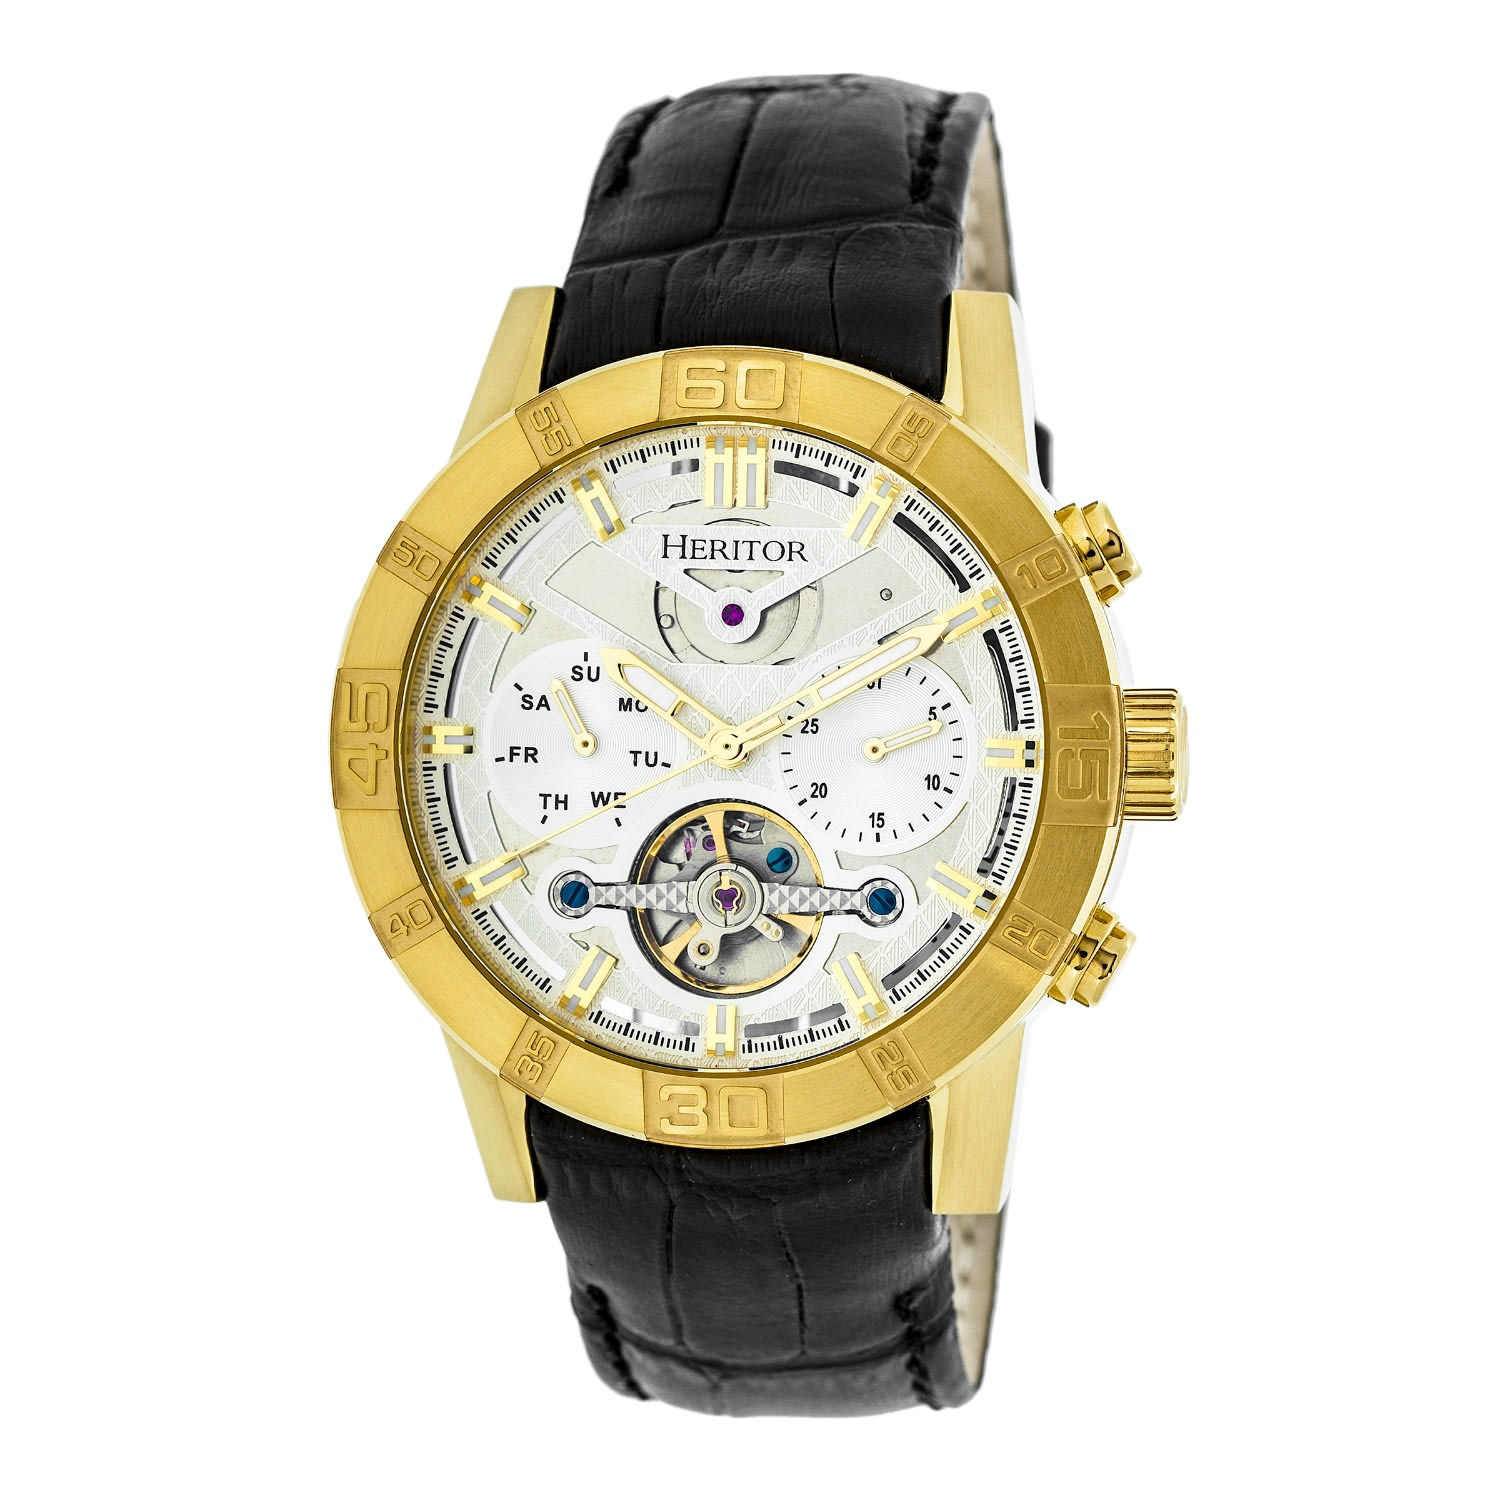 Men’s Silver / Gold Hannibal Semi-Skeleton Leather-Band Watch With Day And Date - Gold, Silver One Size Heritor Automatic